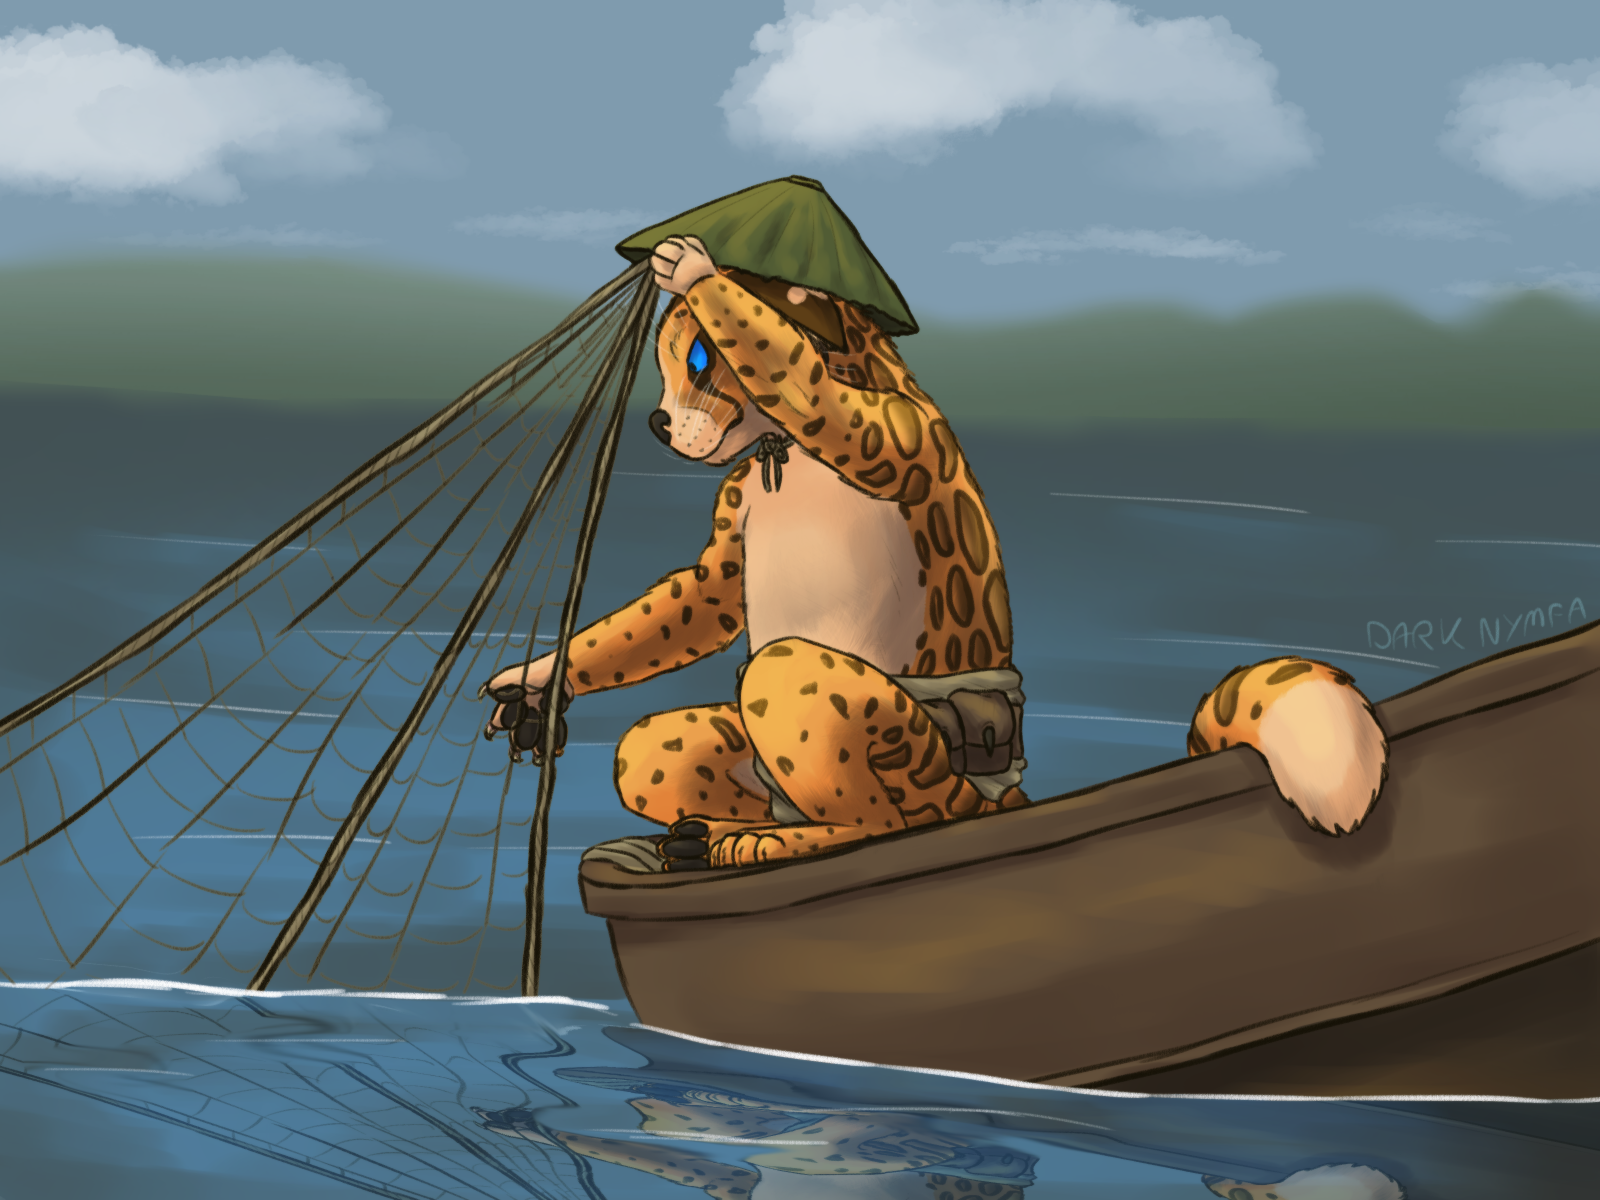 Painting of a cat-like mekki in a boat on the open water, pulling in a large but empty net.